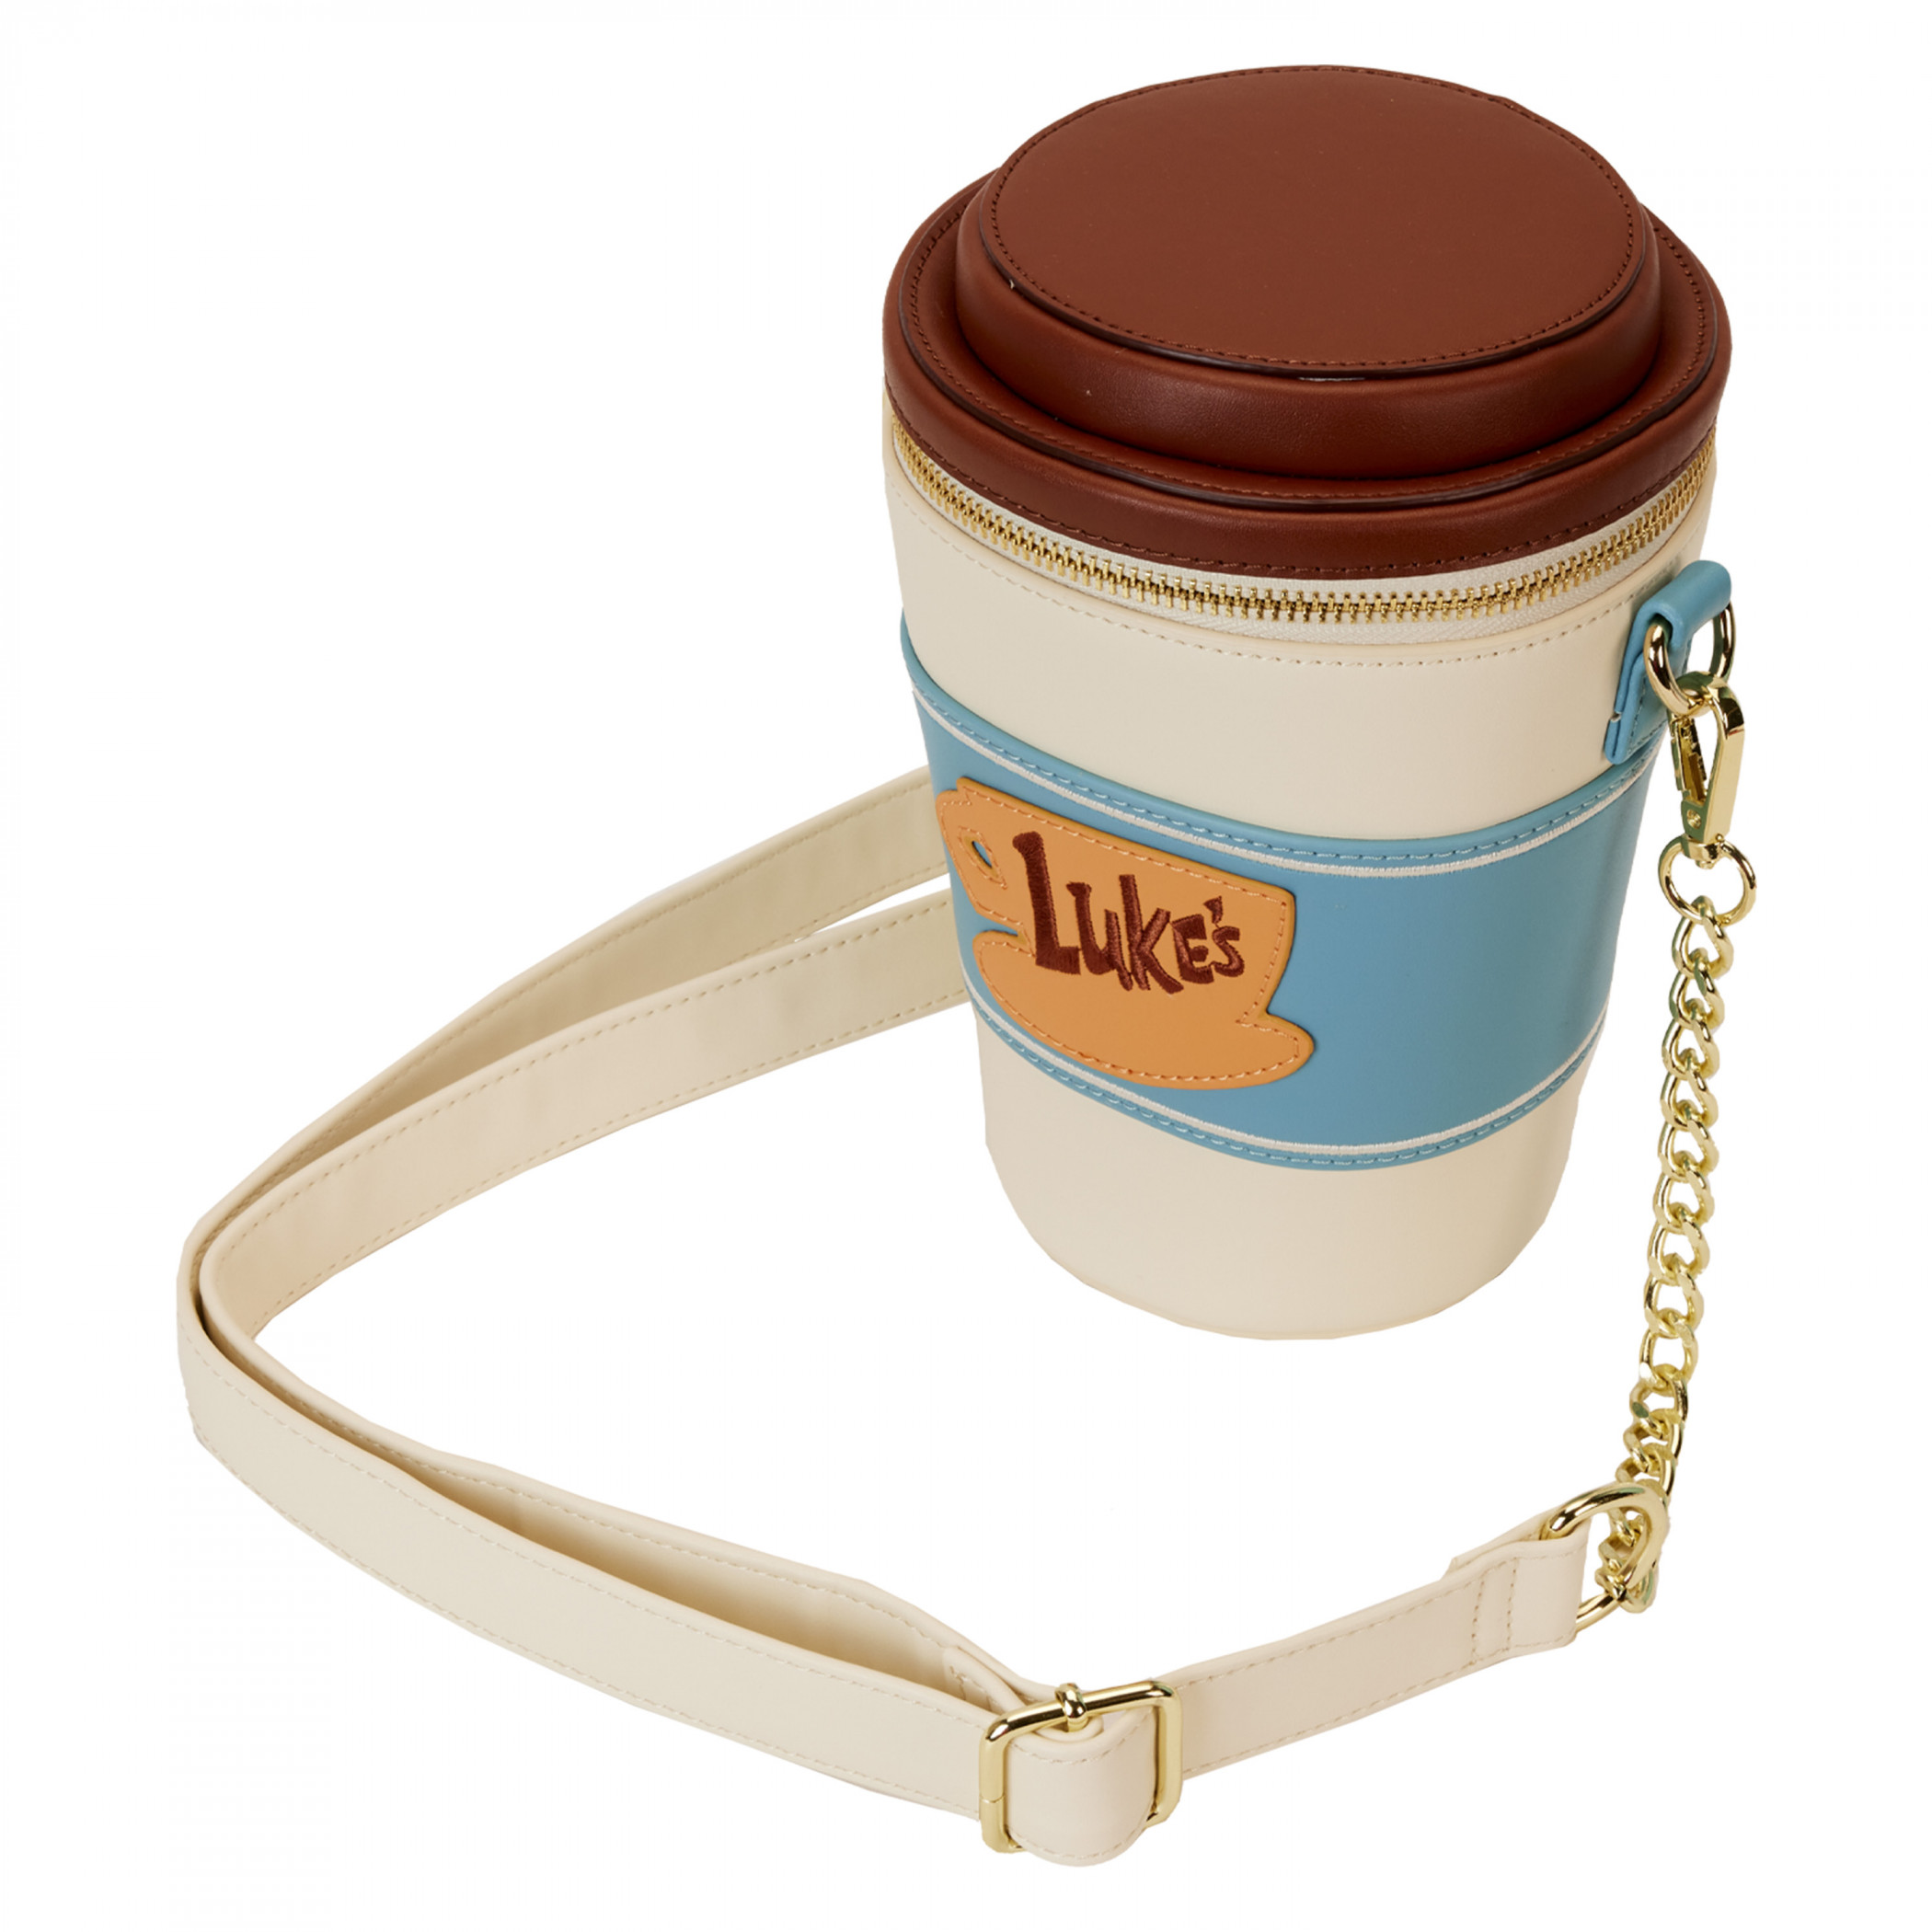 Gilmore Girls Luke's Diner To-Go Cup Crossbody Bag by Loungefly